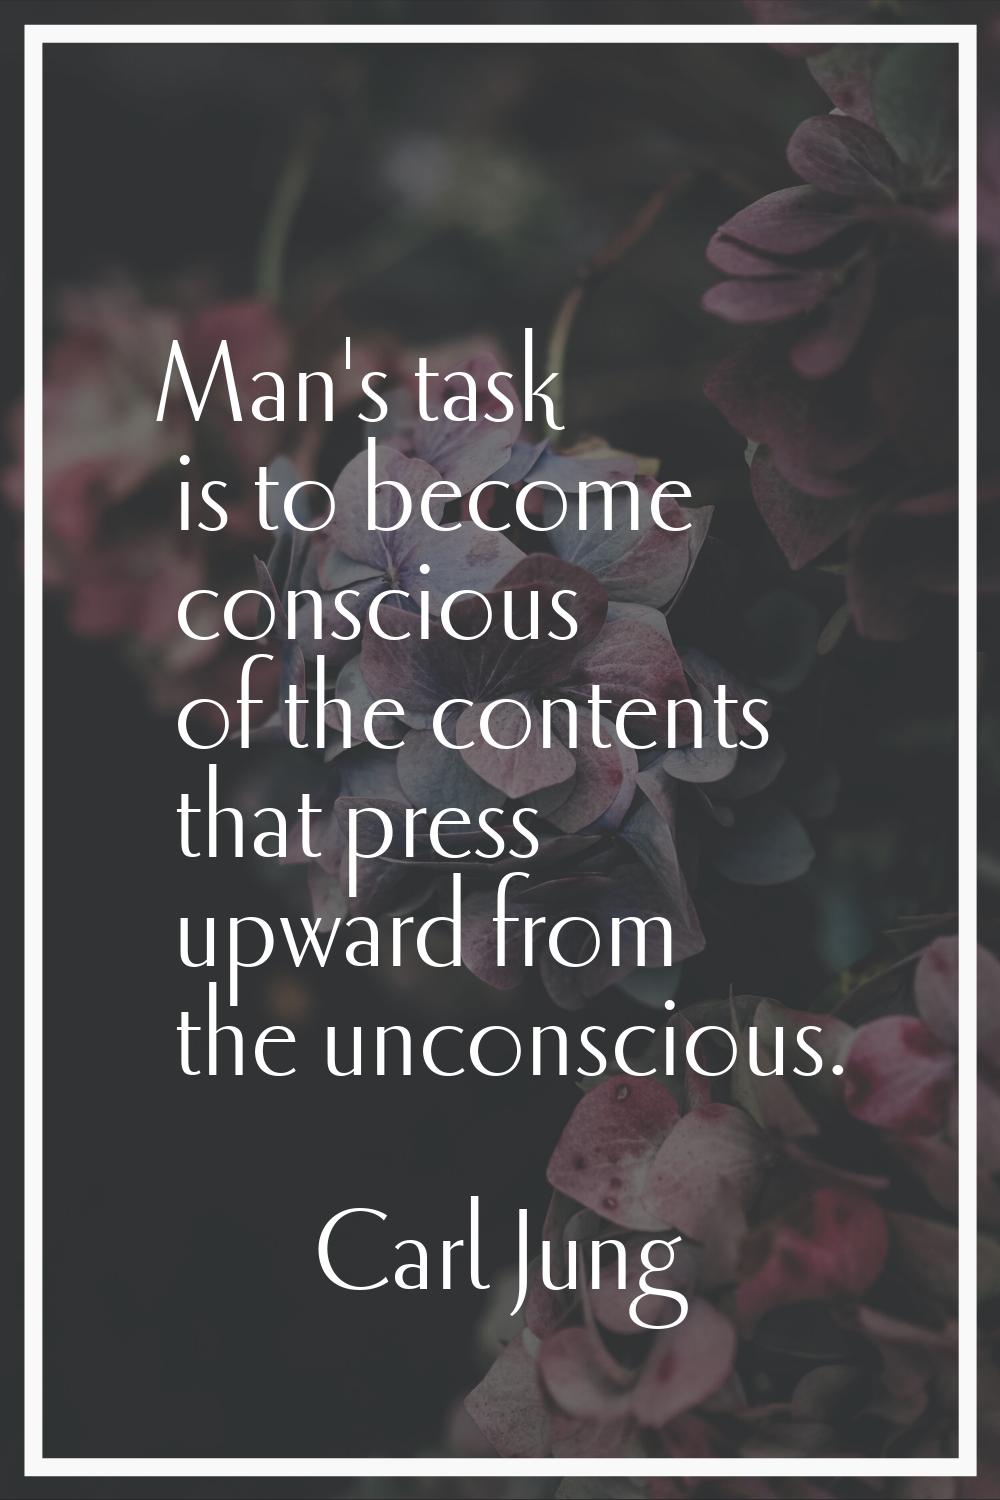 Man's task is to become conscious of the contents that press upward from the unconscious.